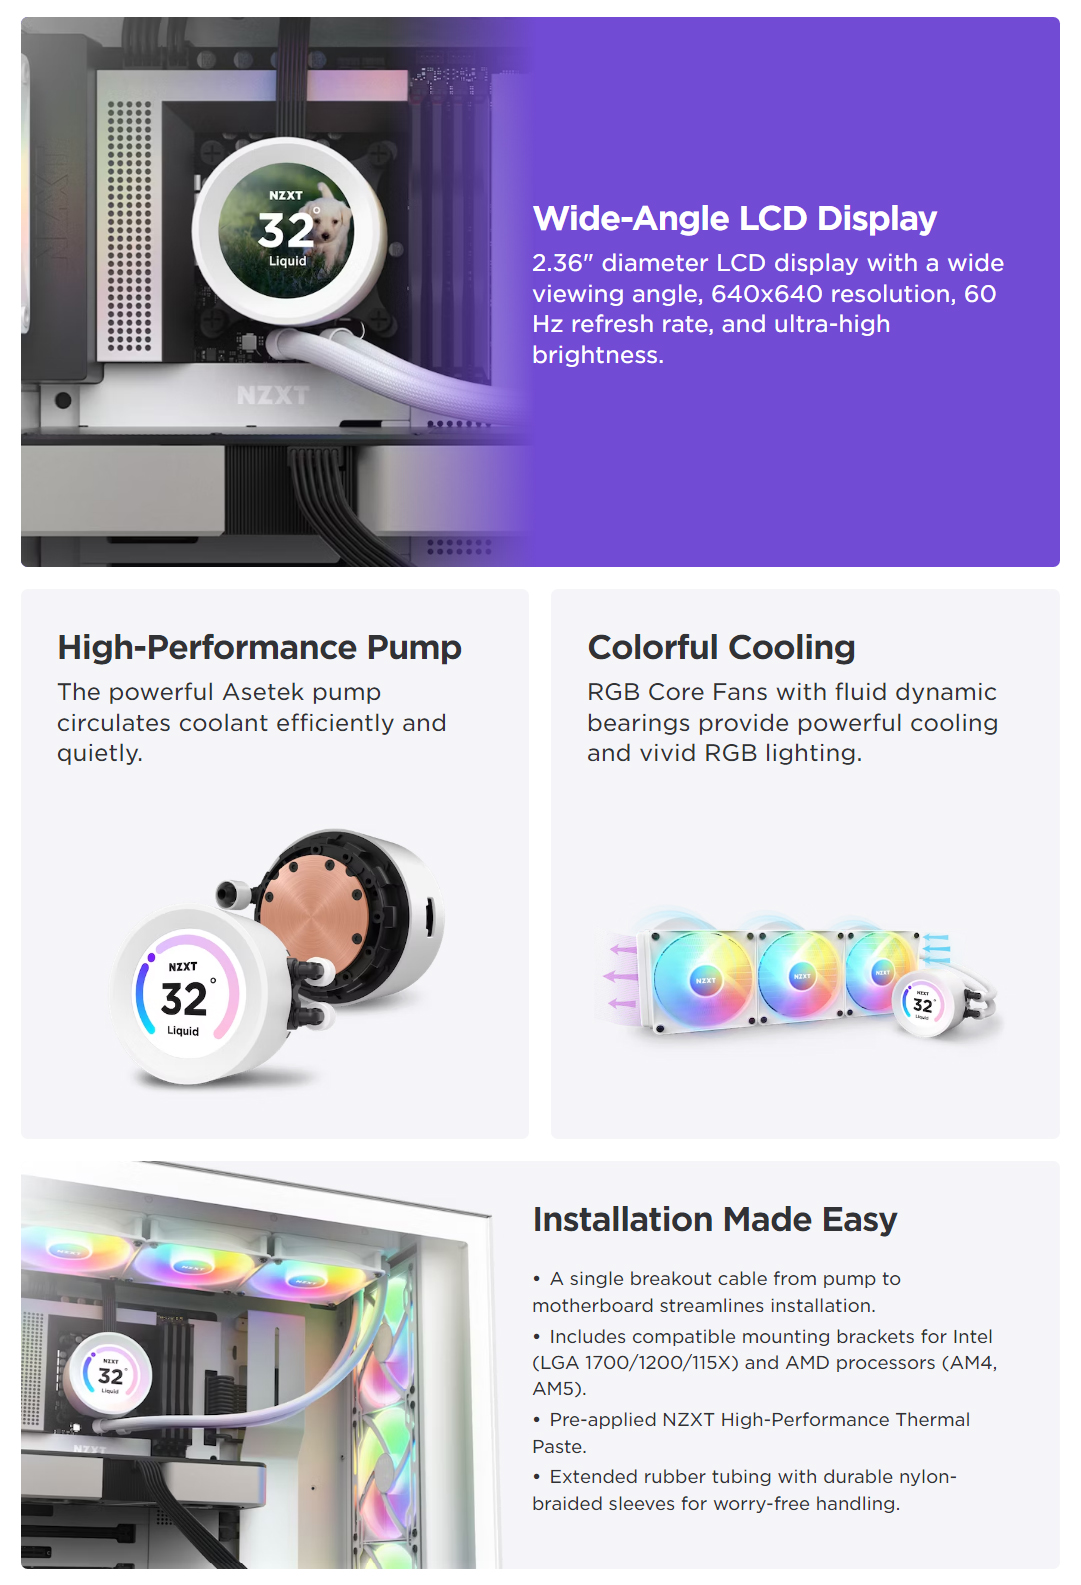 NZXT-Kraken-Elite-360-RGB-360mm-AIO-Liquid-CPU-Cooling-with-LCD-Display-White-1